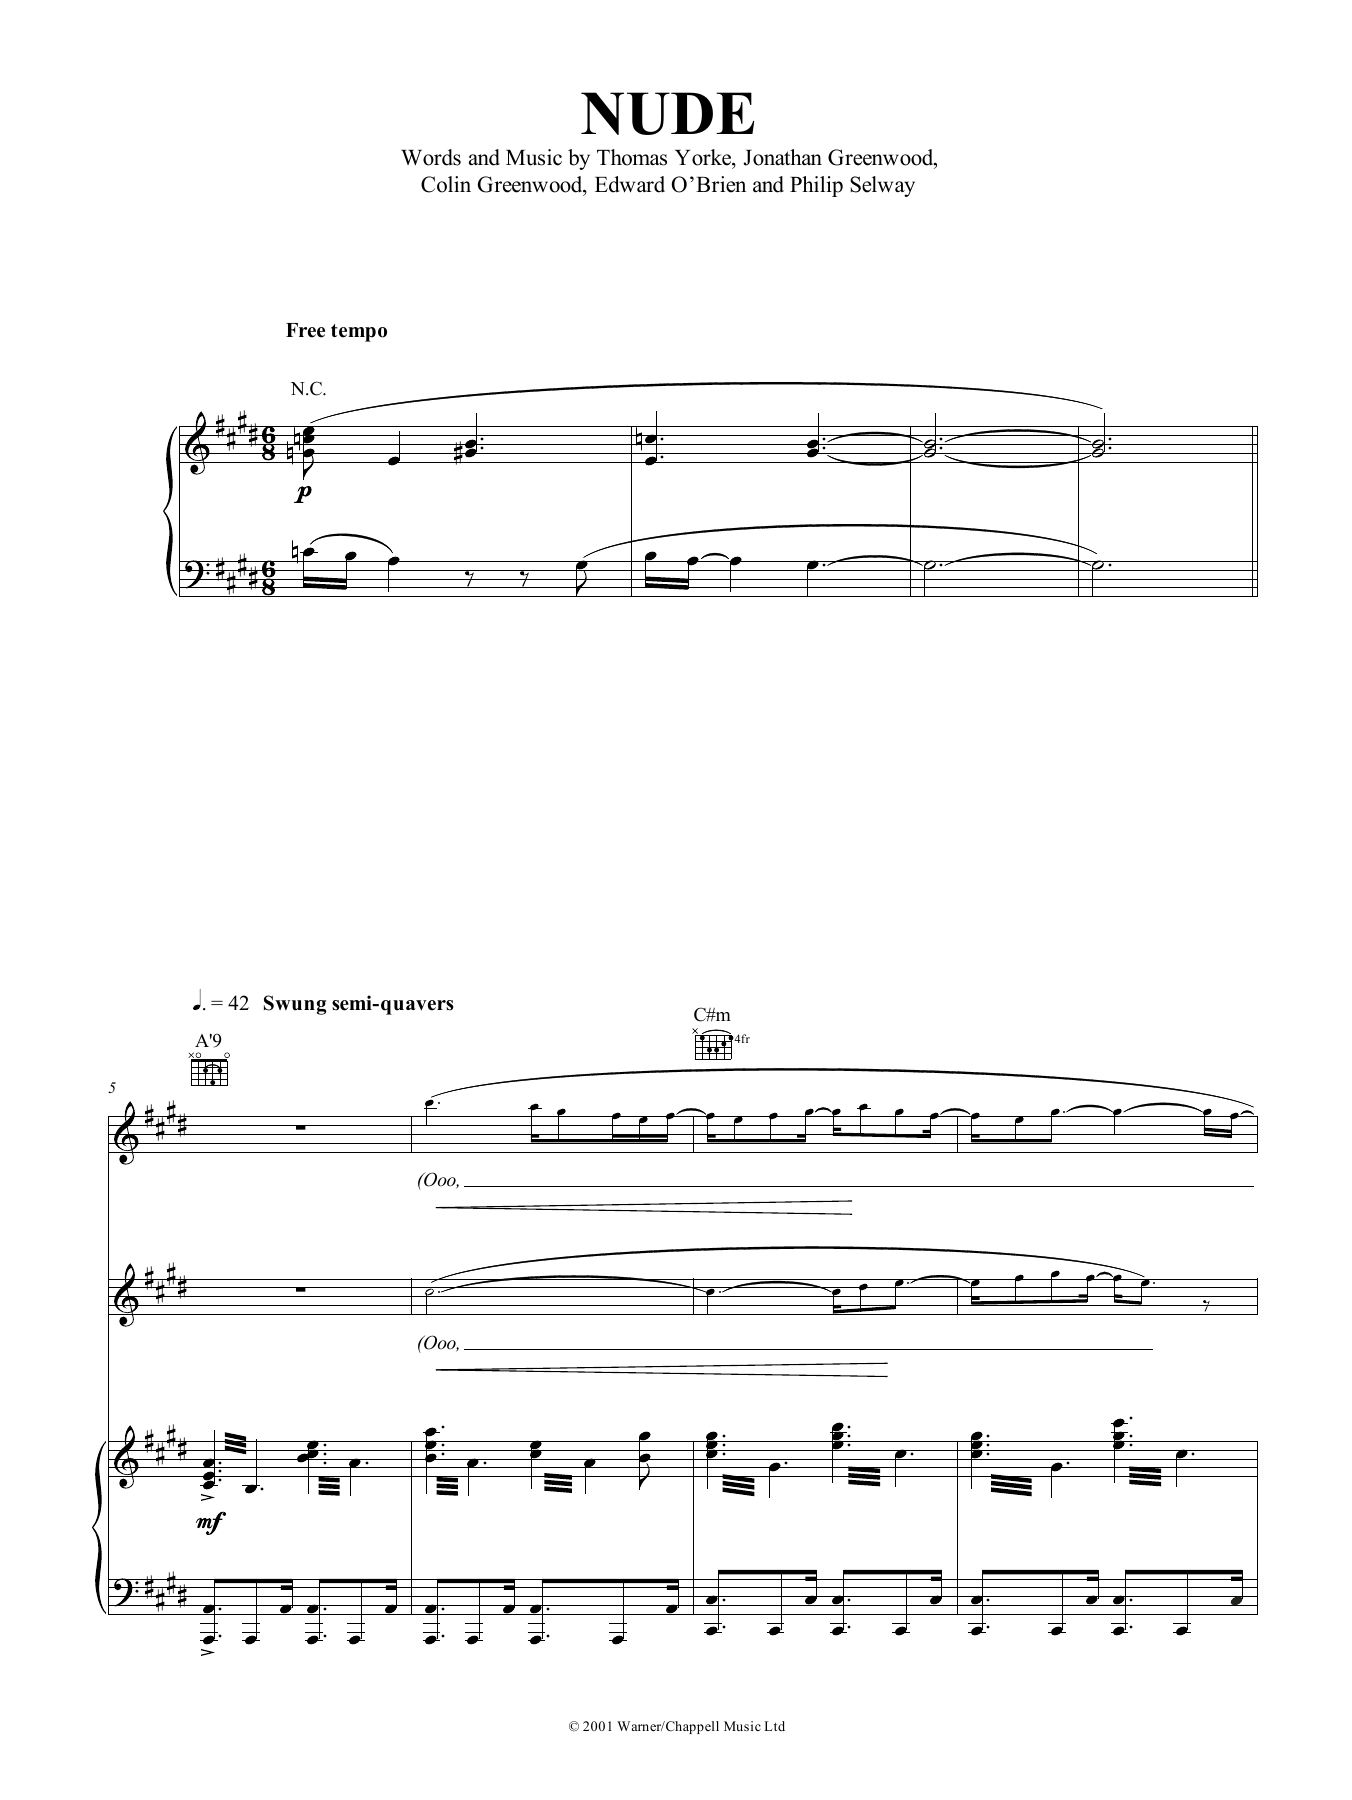 Radiohead Nude sheet music notes and chords. Download Printable PDF.